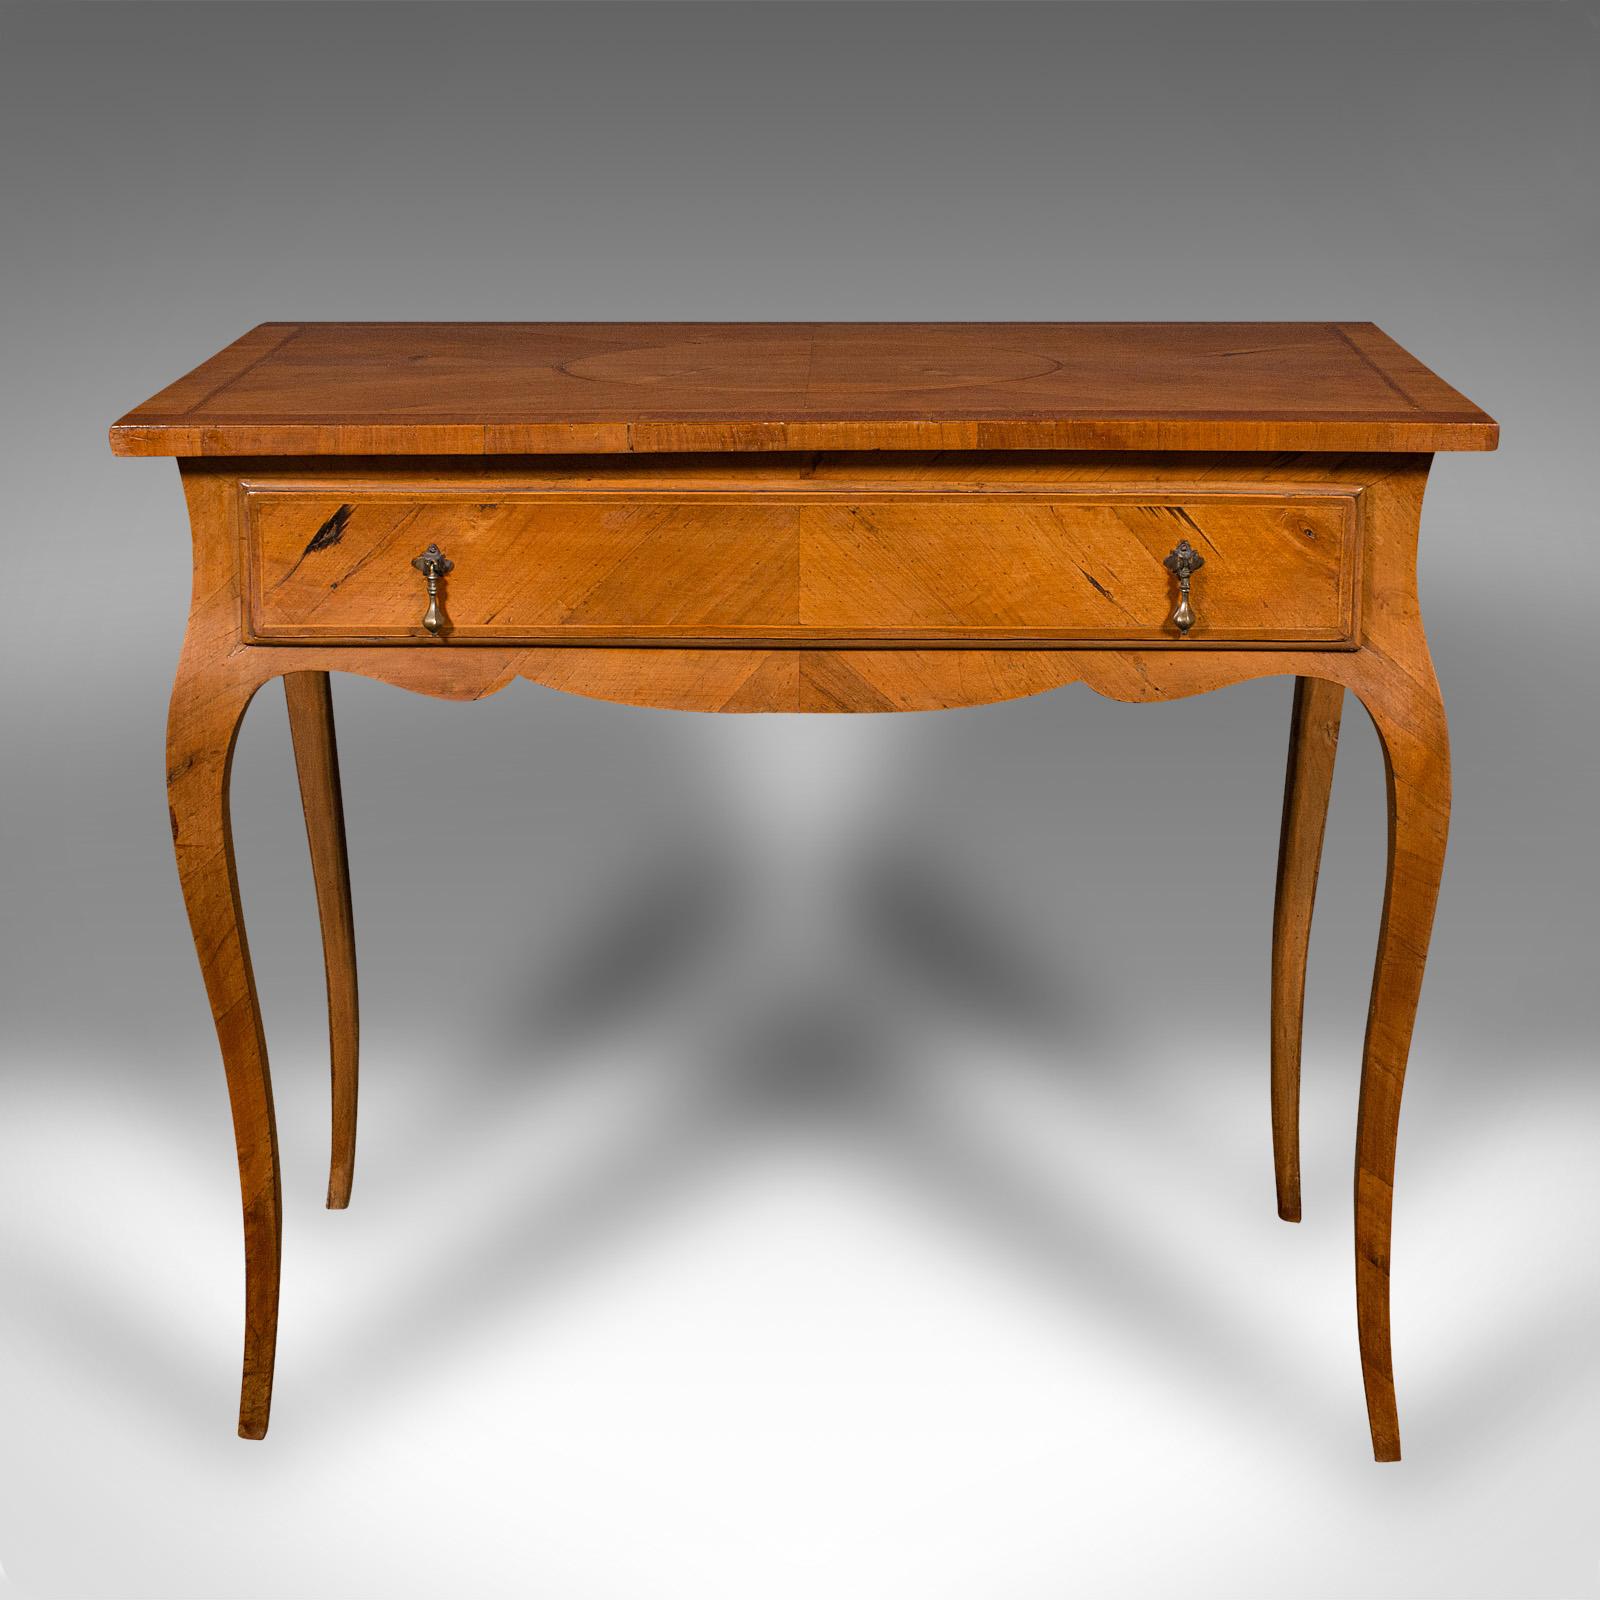 This is an antique bureau plat. A French, walnut and boxwood writing desk in Louis XV revival taste, dating to the late Victorian period, circa 1900.
 
Beautiful revival homage to the celebrated Louis XV taste
Displays a desirable aged patina and